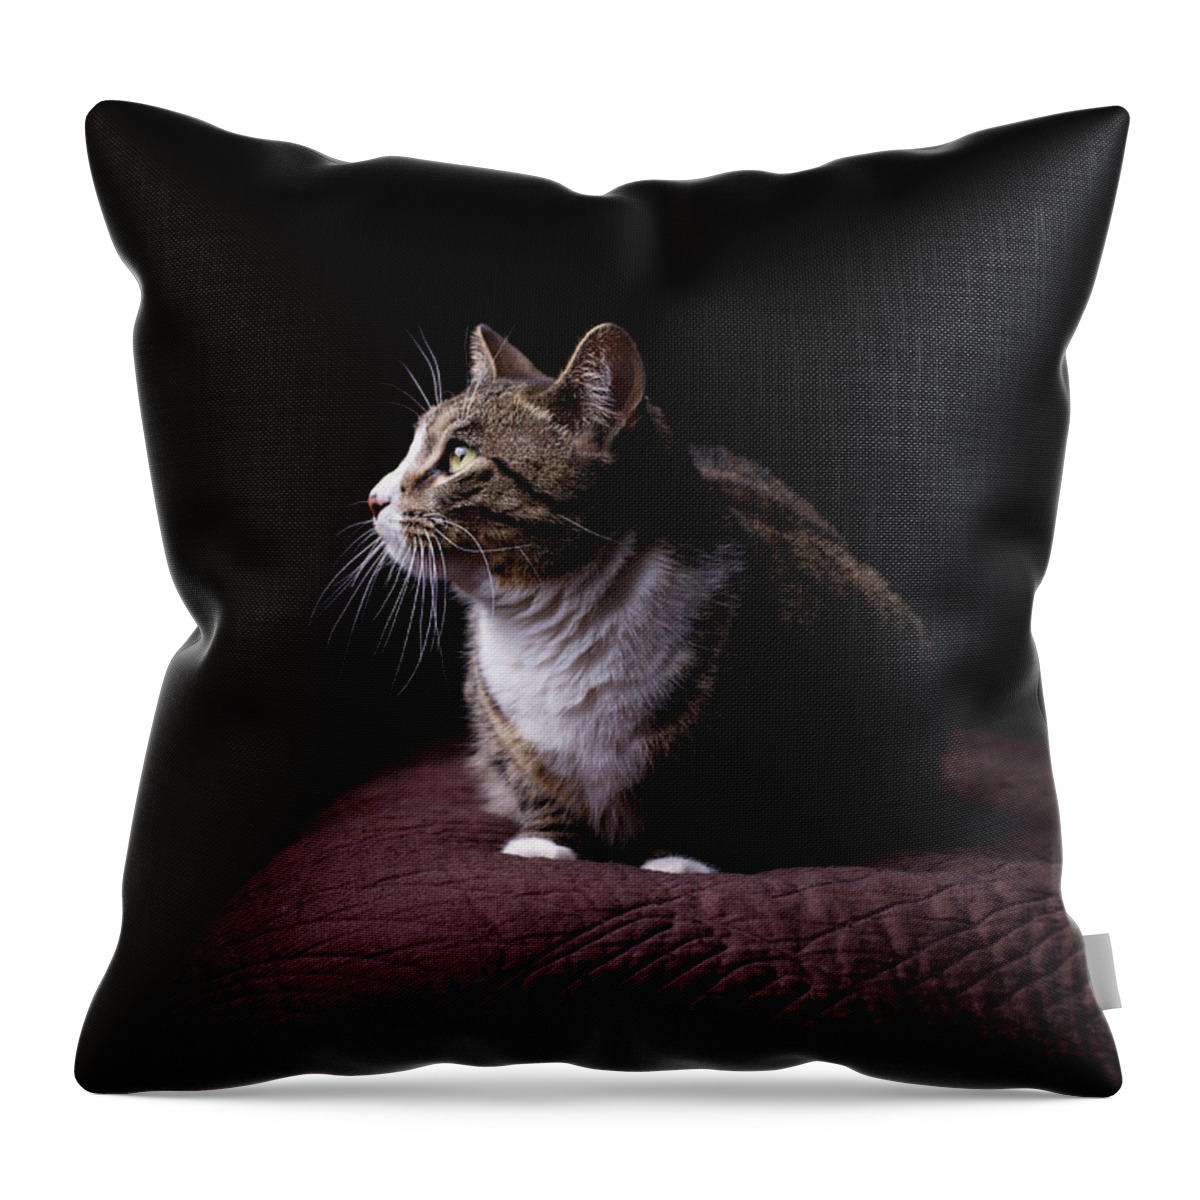 Pets Throw Pillow featuring the photograph Cat On Bed, Close-up by Matt Carr